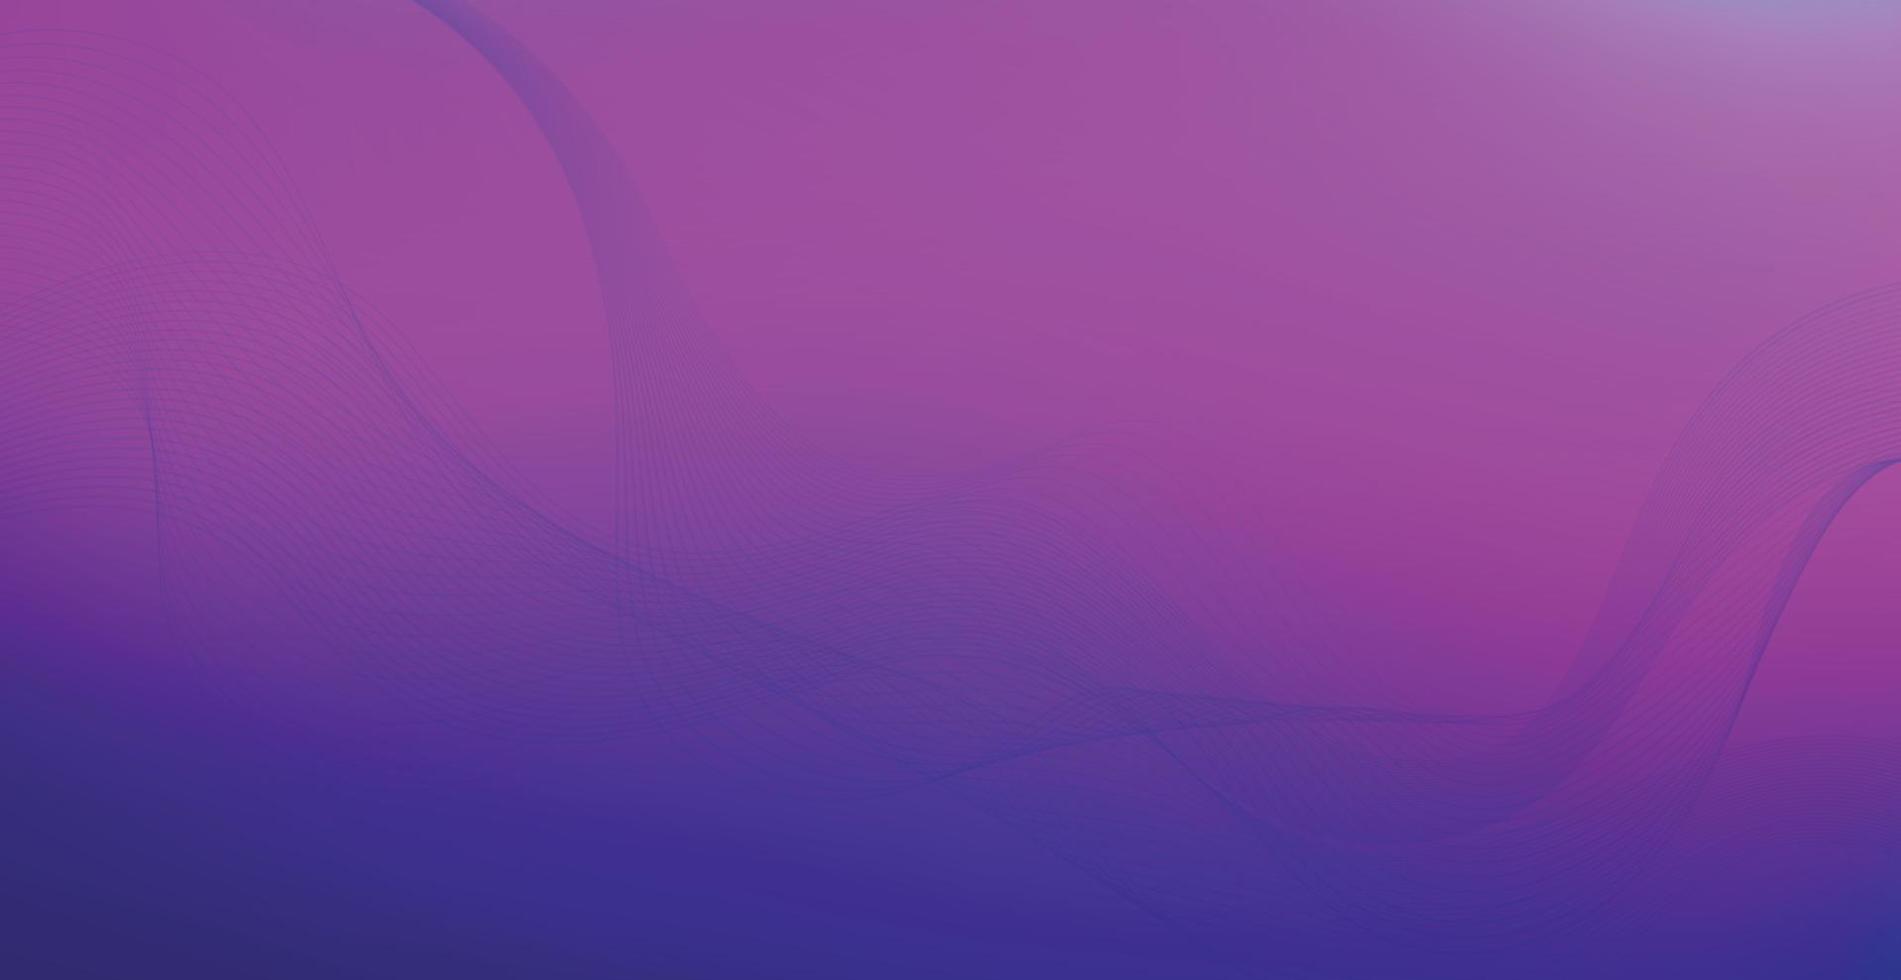 Panoramic blue purple light abstract stylish multi background with wavy lines - Vector